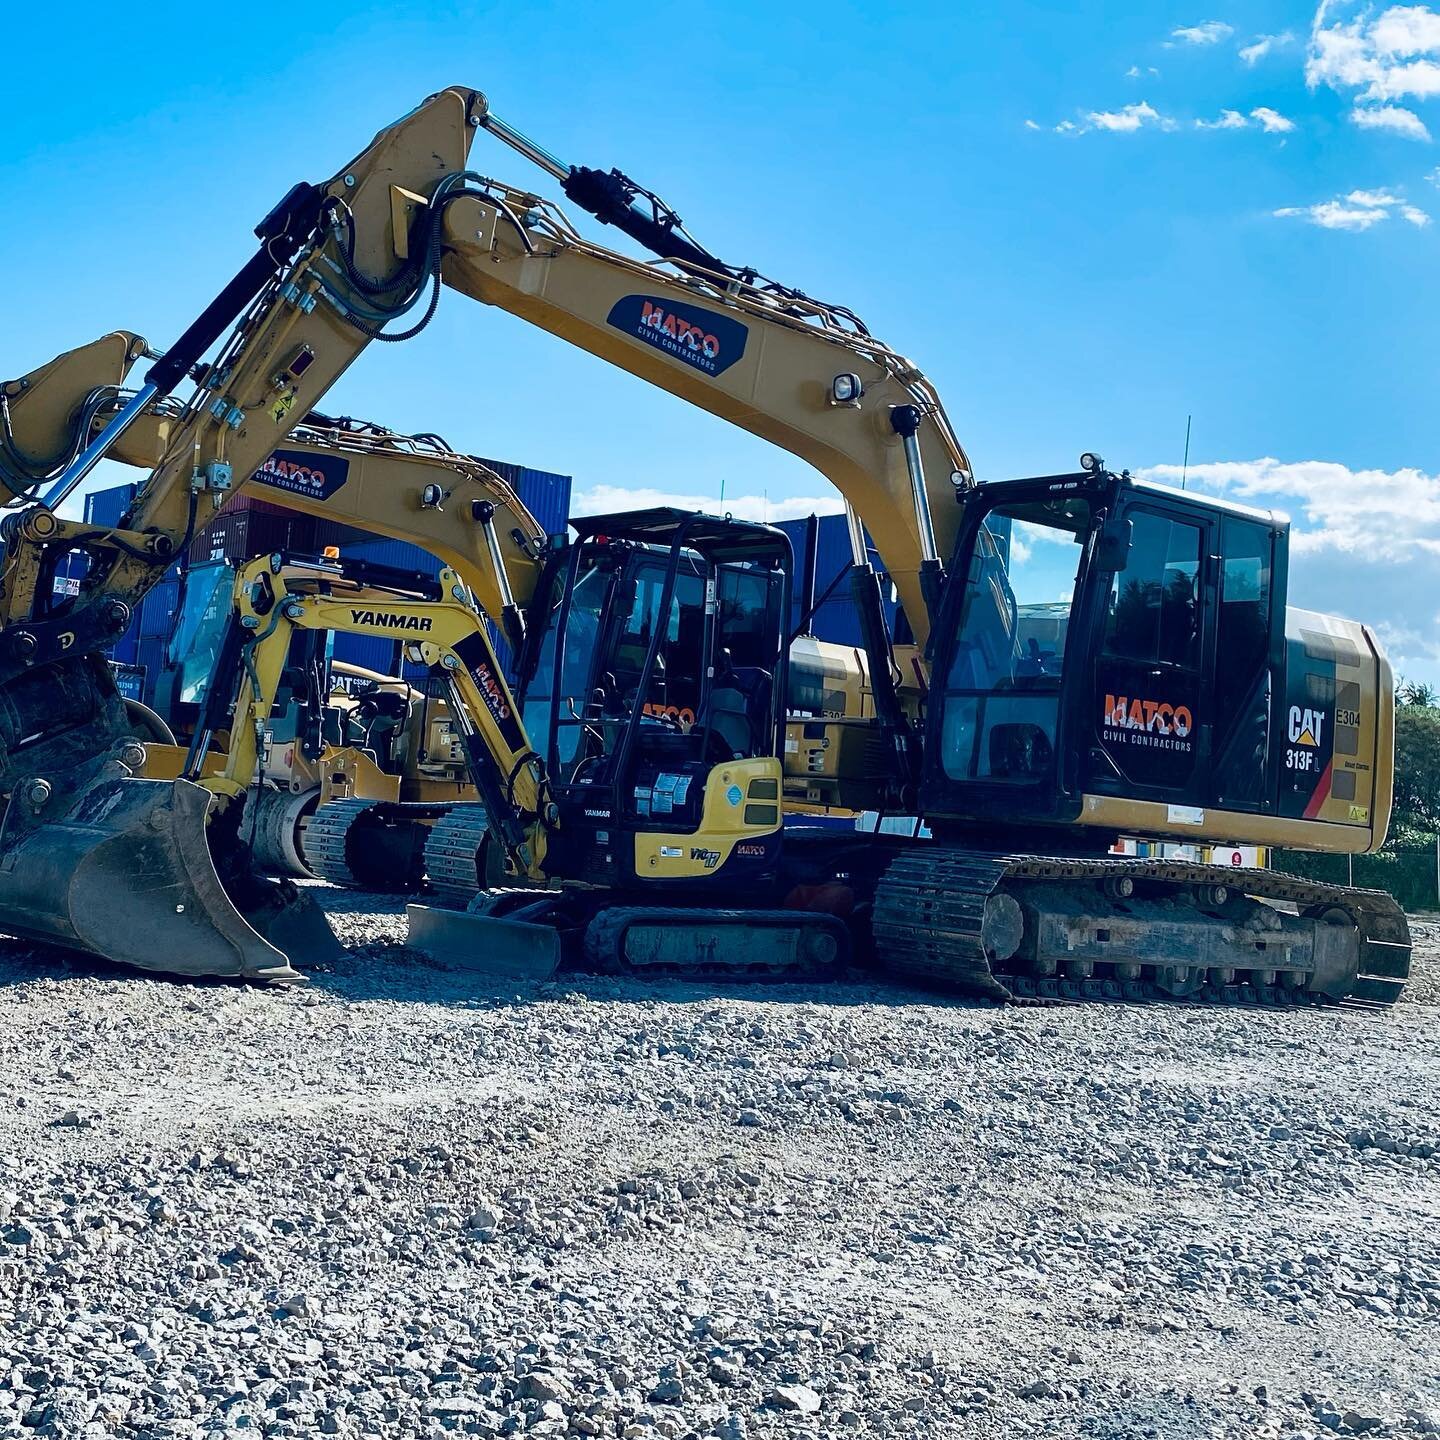 When a mummy digger really really loves a daddy digger, sometimes they have a wee baby digger&hellip;..MATCO - teaching lifes lessons since 2017.  #matcocivil #babydiggity #yanmarexcavator